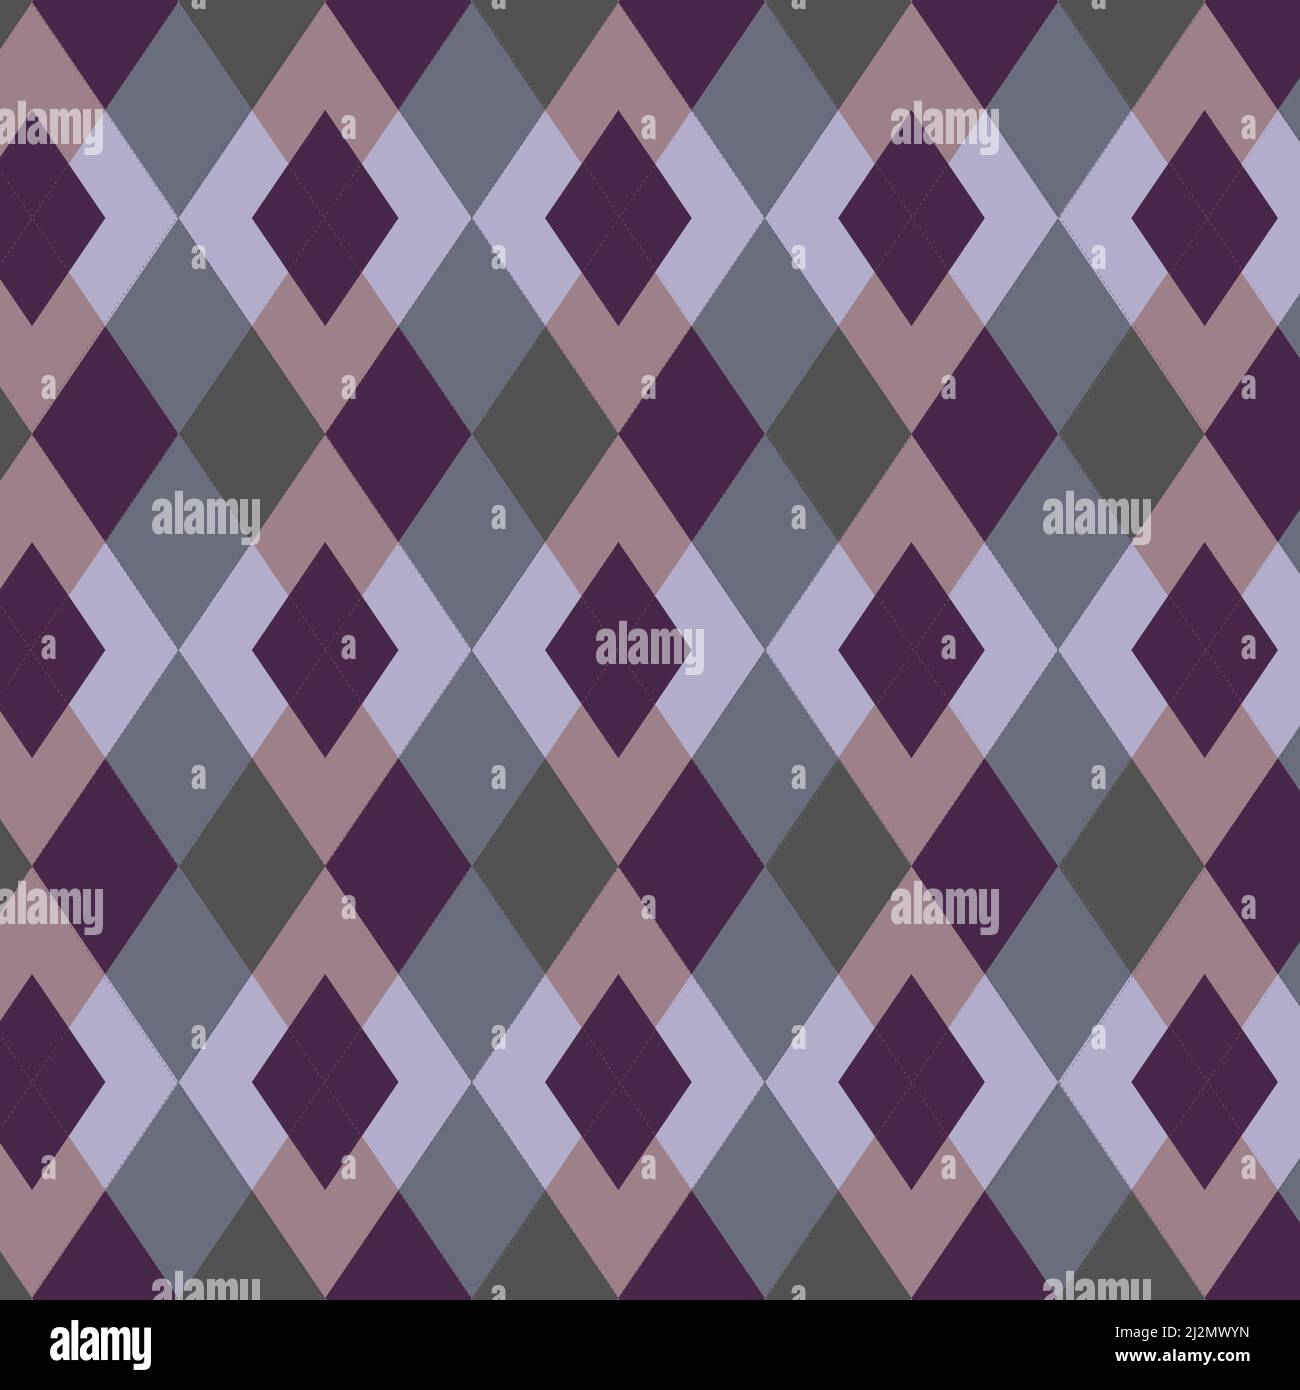 Rhombus Square Pattern Design In Violet Green Grey Color Stock Vector